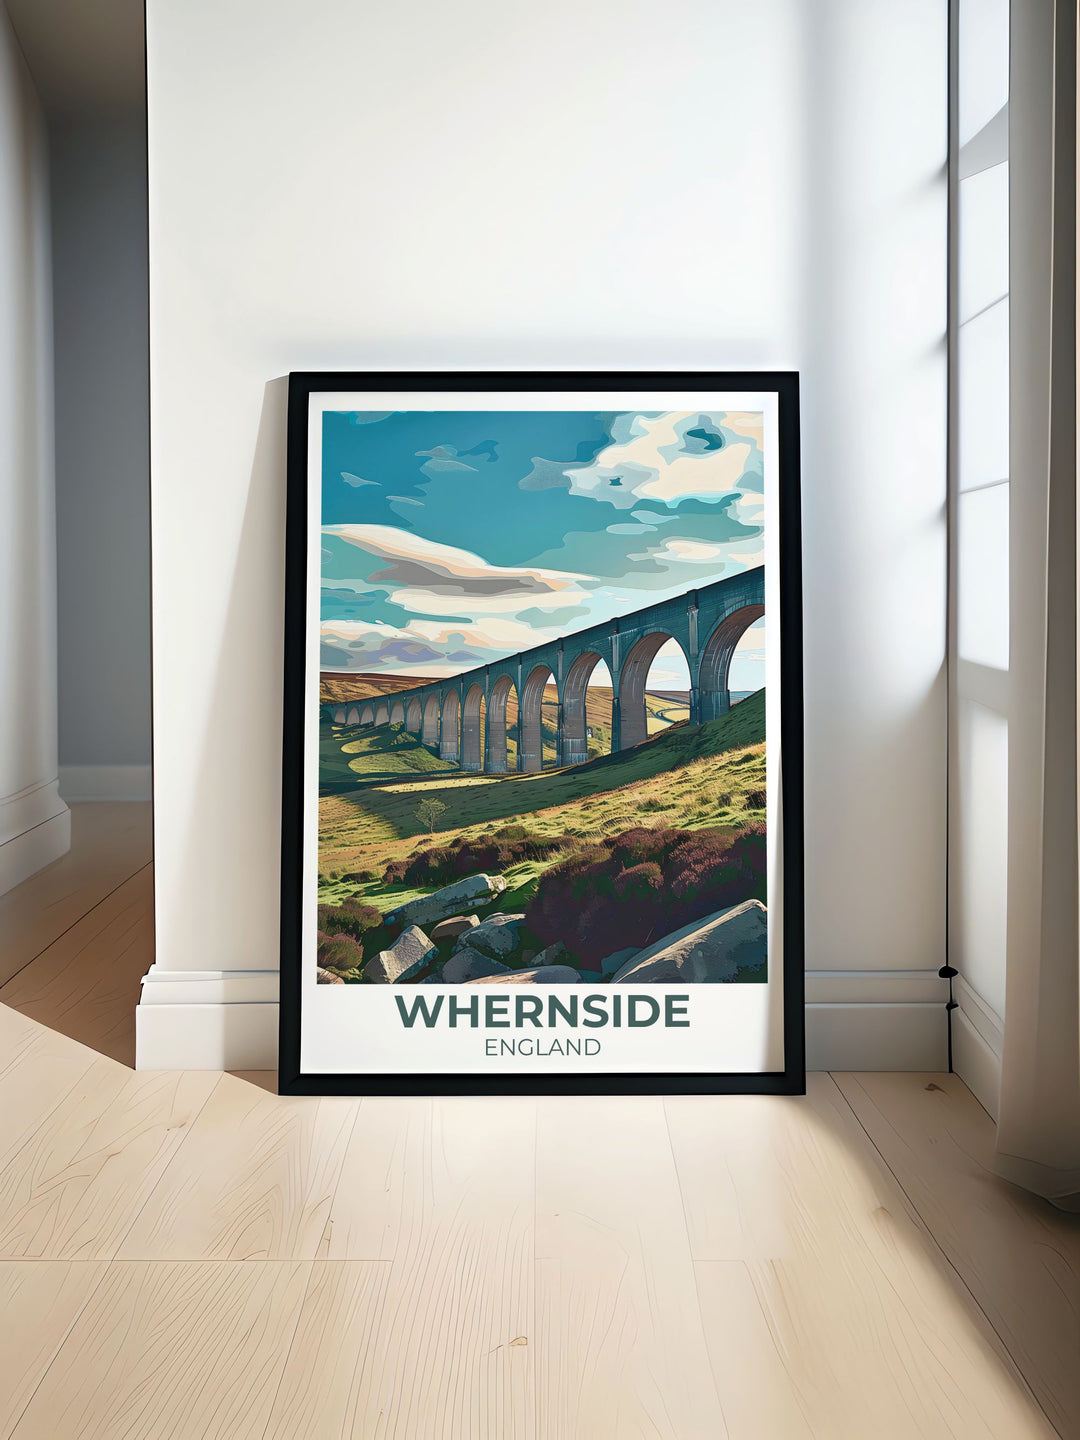 Timeless framed art depicting the serene beauty of the Ribblehead Viaduct, Yorkshire. The vibrant colors and detailed illustrations highlight the historic engineering marvel, making it a perfect addition to any room.